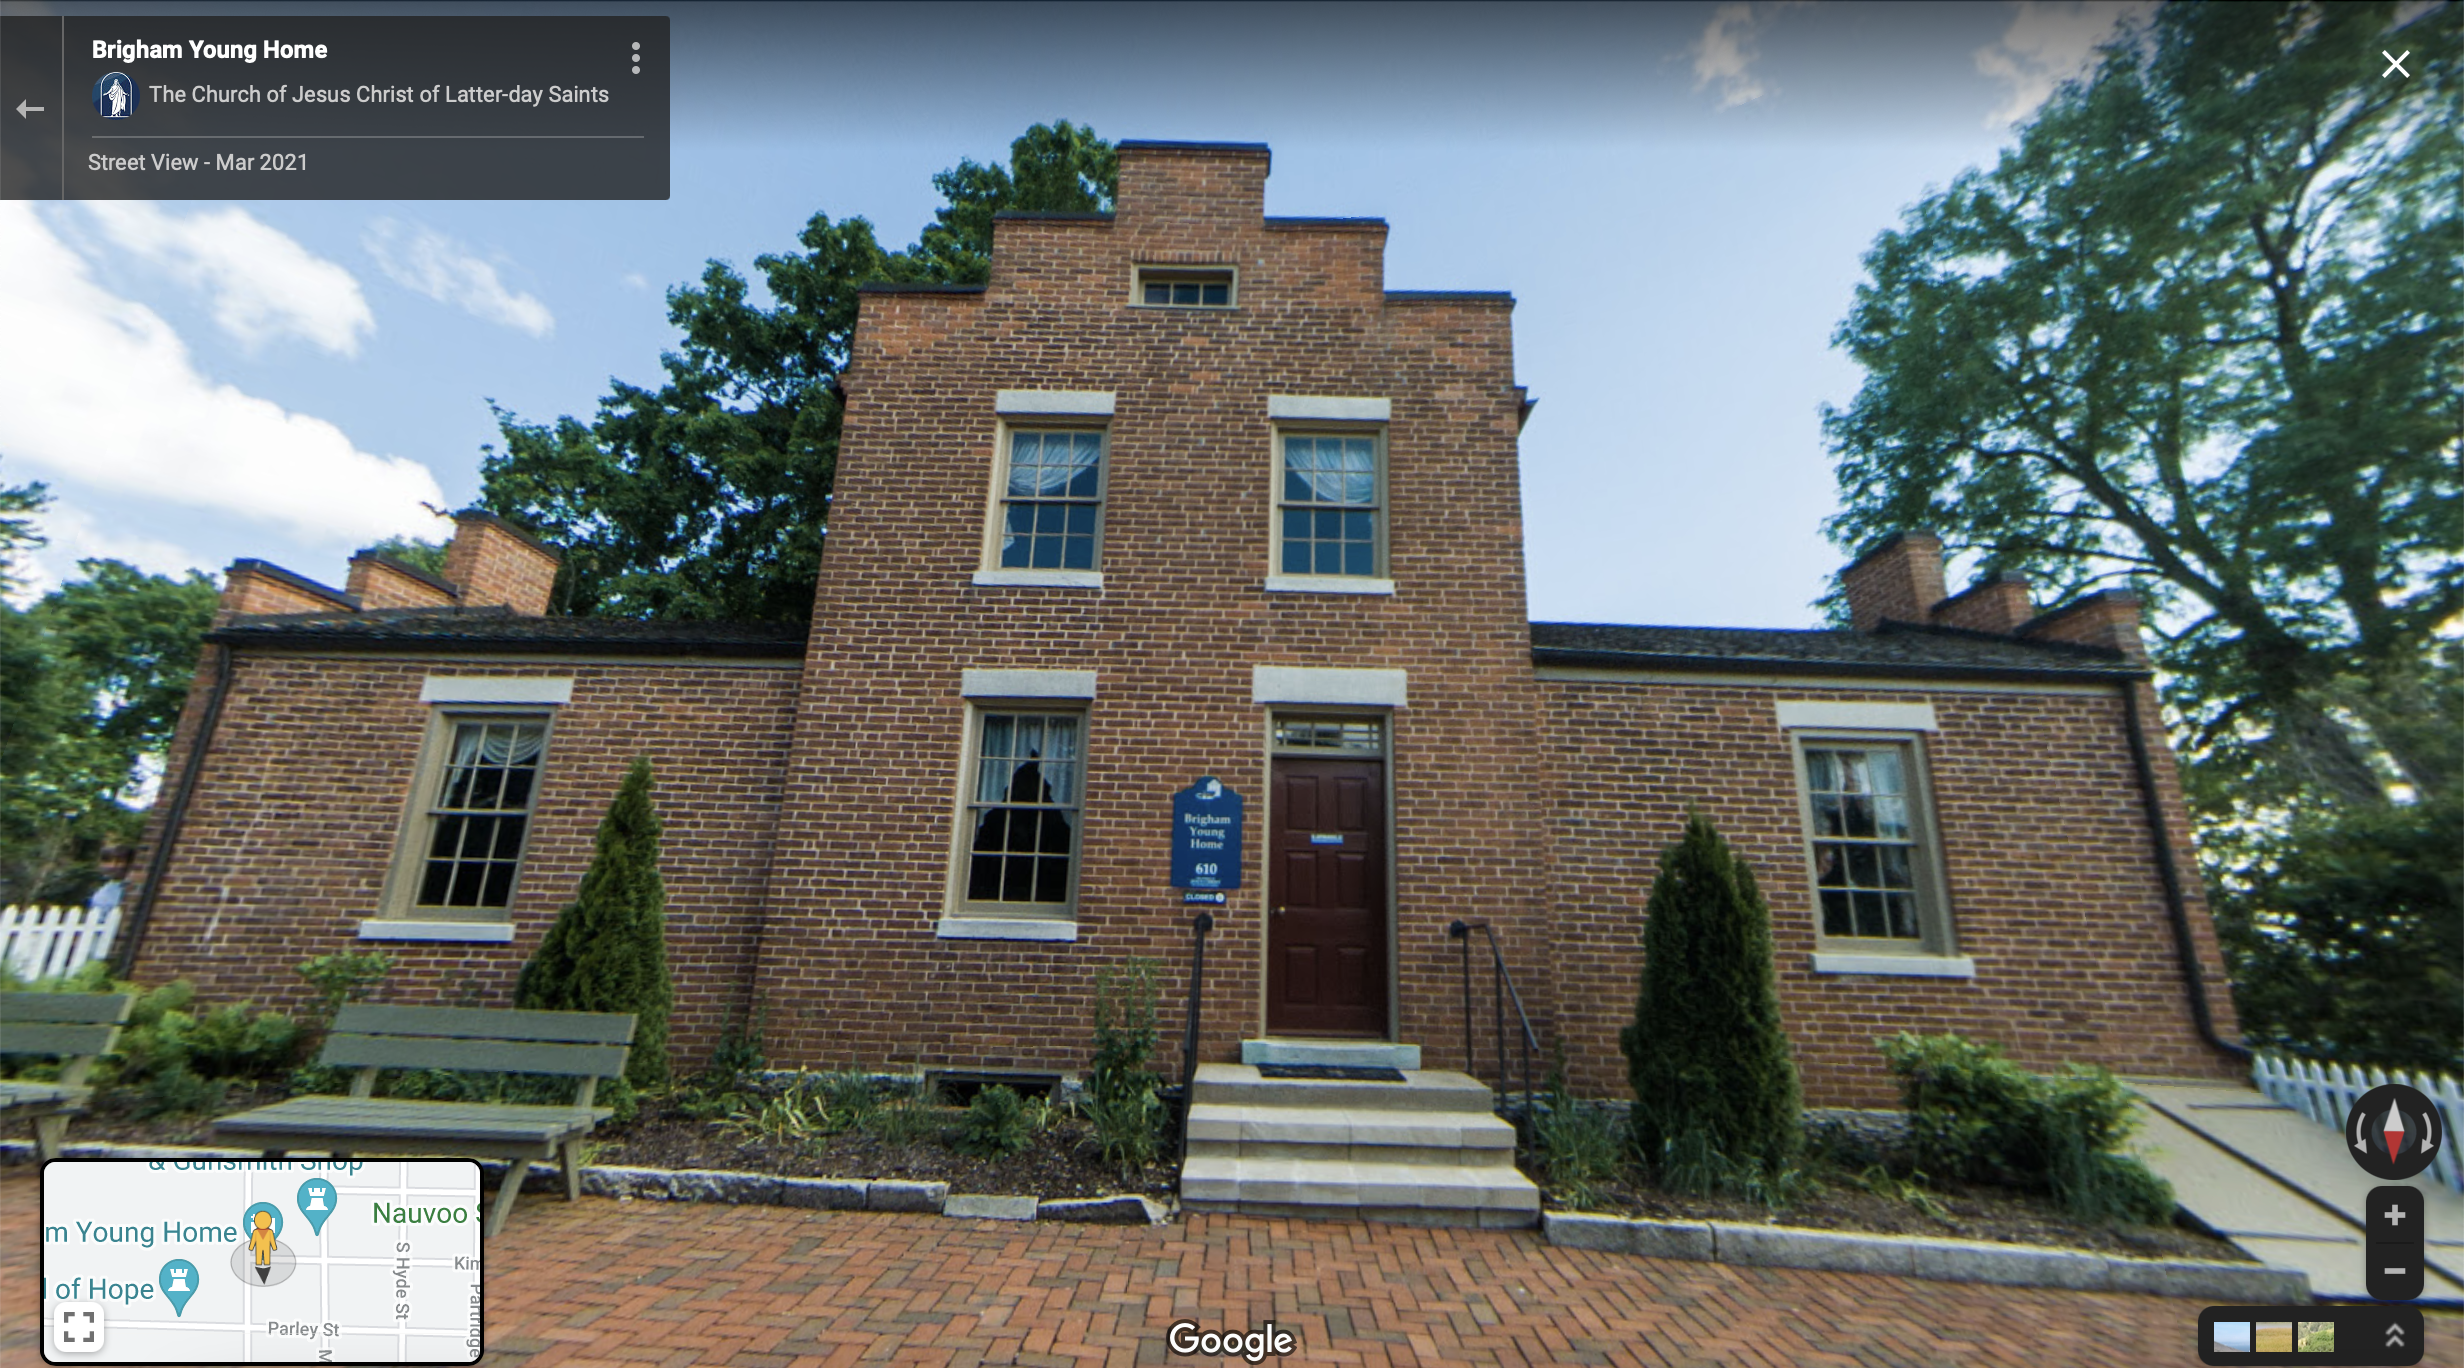 Screenshot of the Google Maps 360 view of the Brigham Young Home